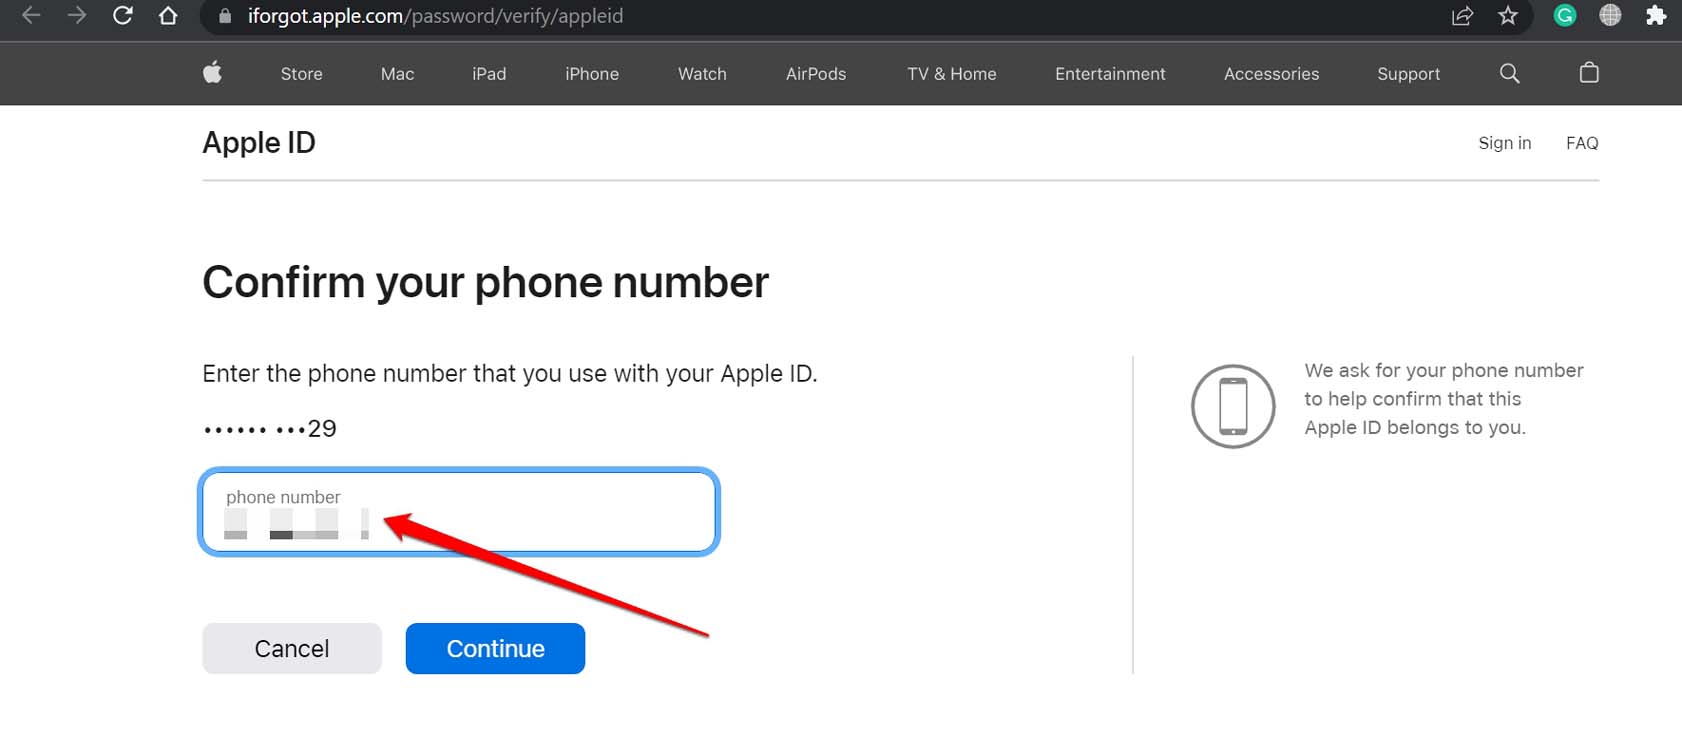 confirm phone number for Apple ID